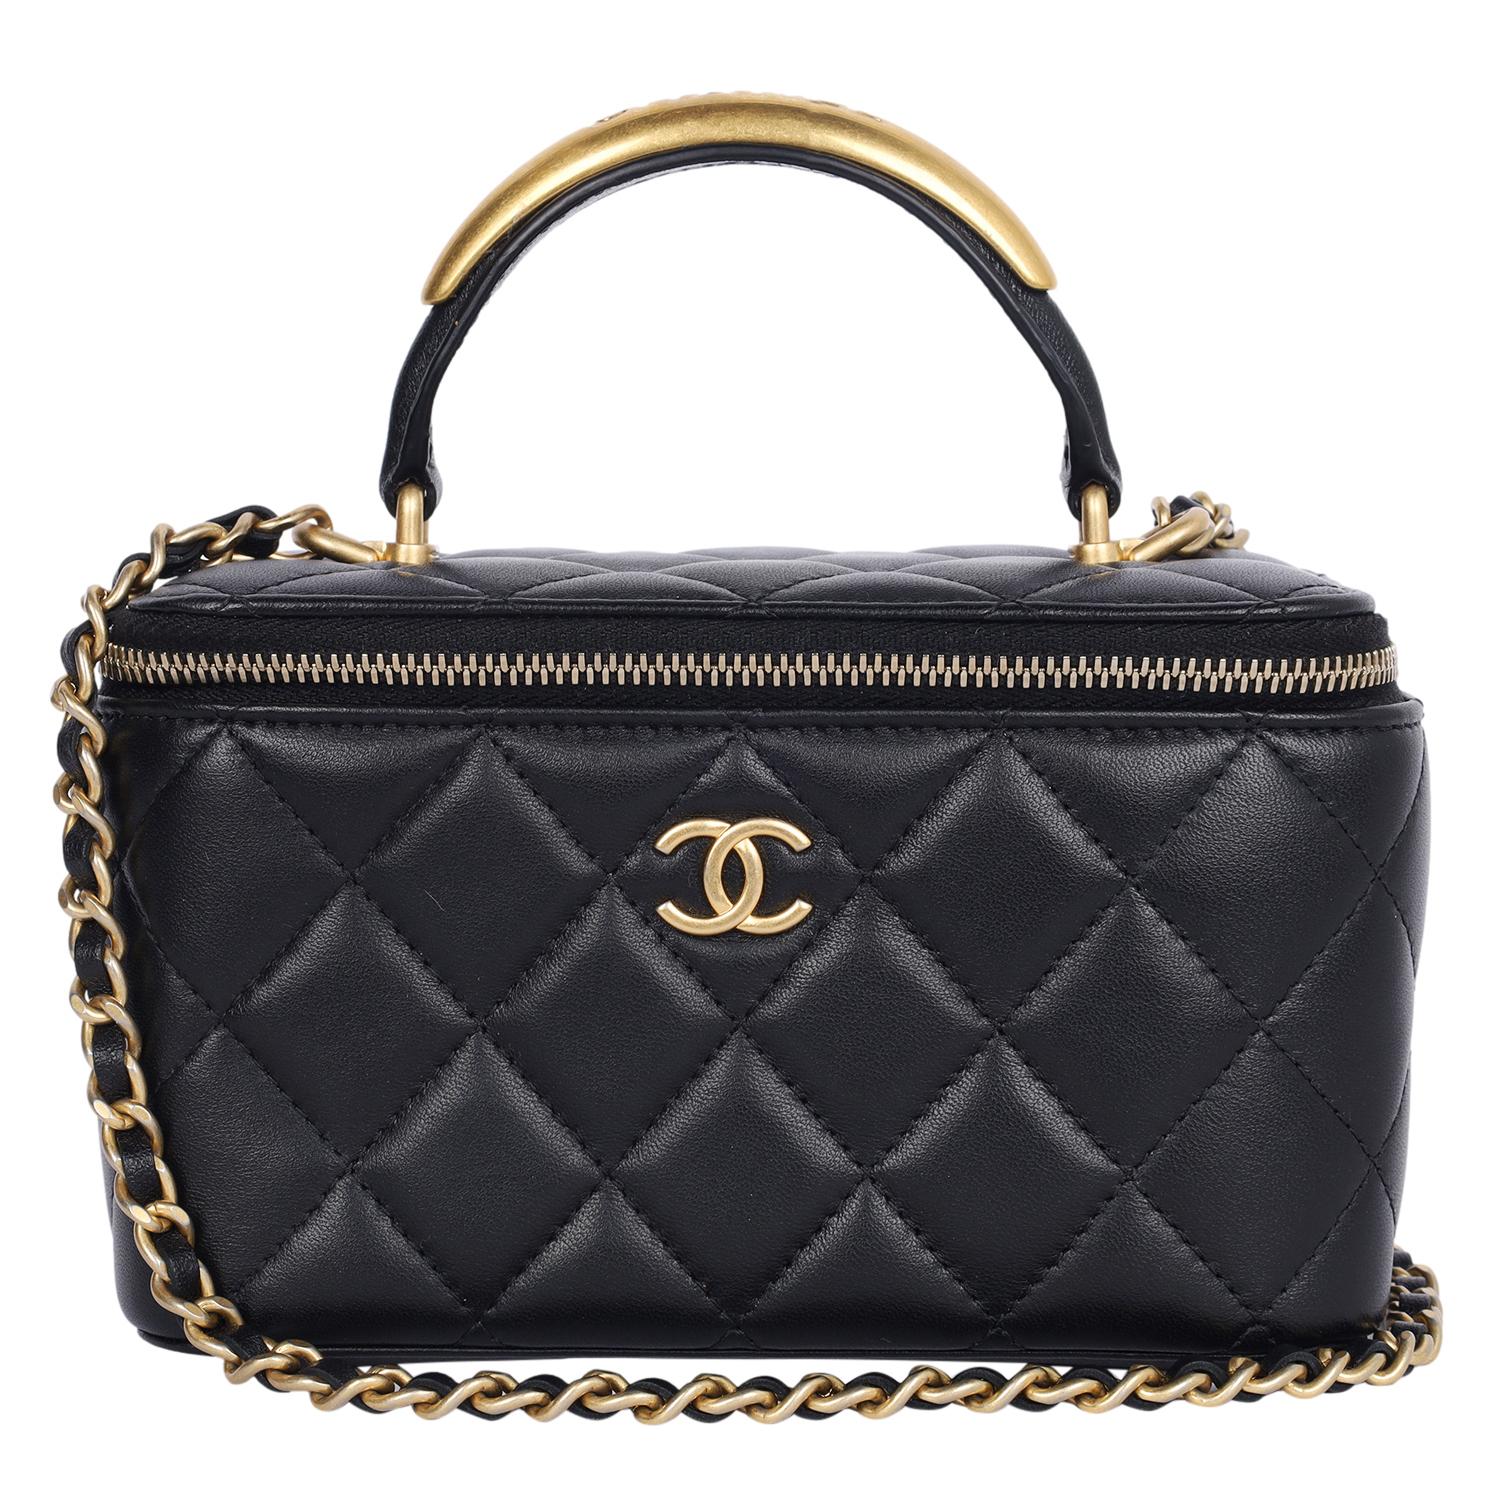 Chanel Lambskin Quilted Small Top Handle Vanity Case Black Crossbody Bag 6